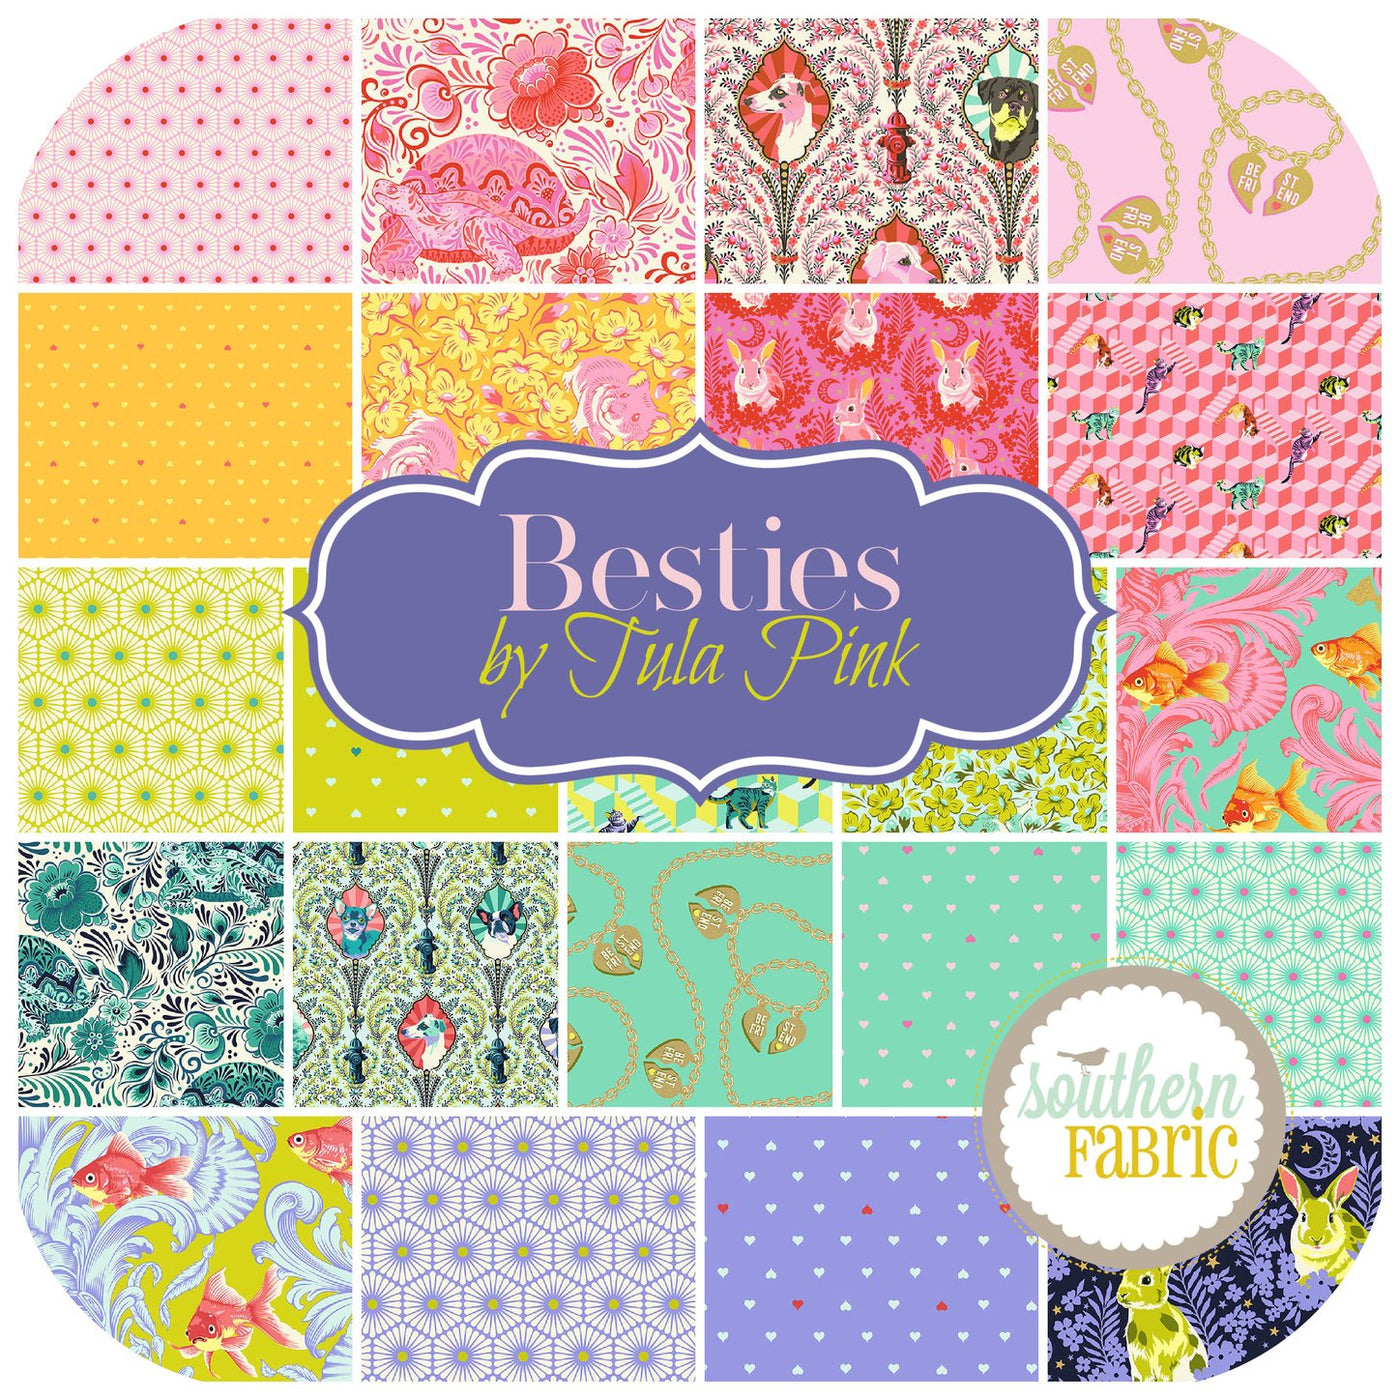 Besties Layer Cake (42 pcs) by Tula Pink for Free Spirit (FB610TP.BESTIES)